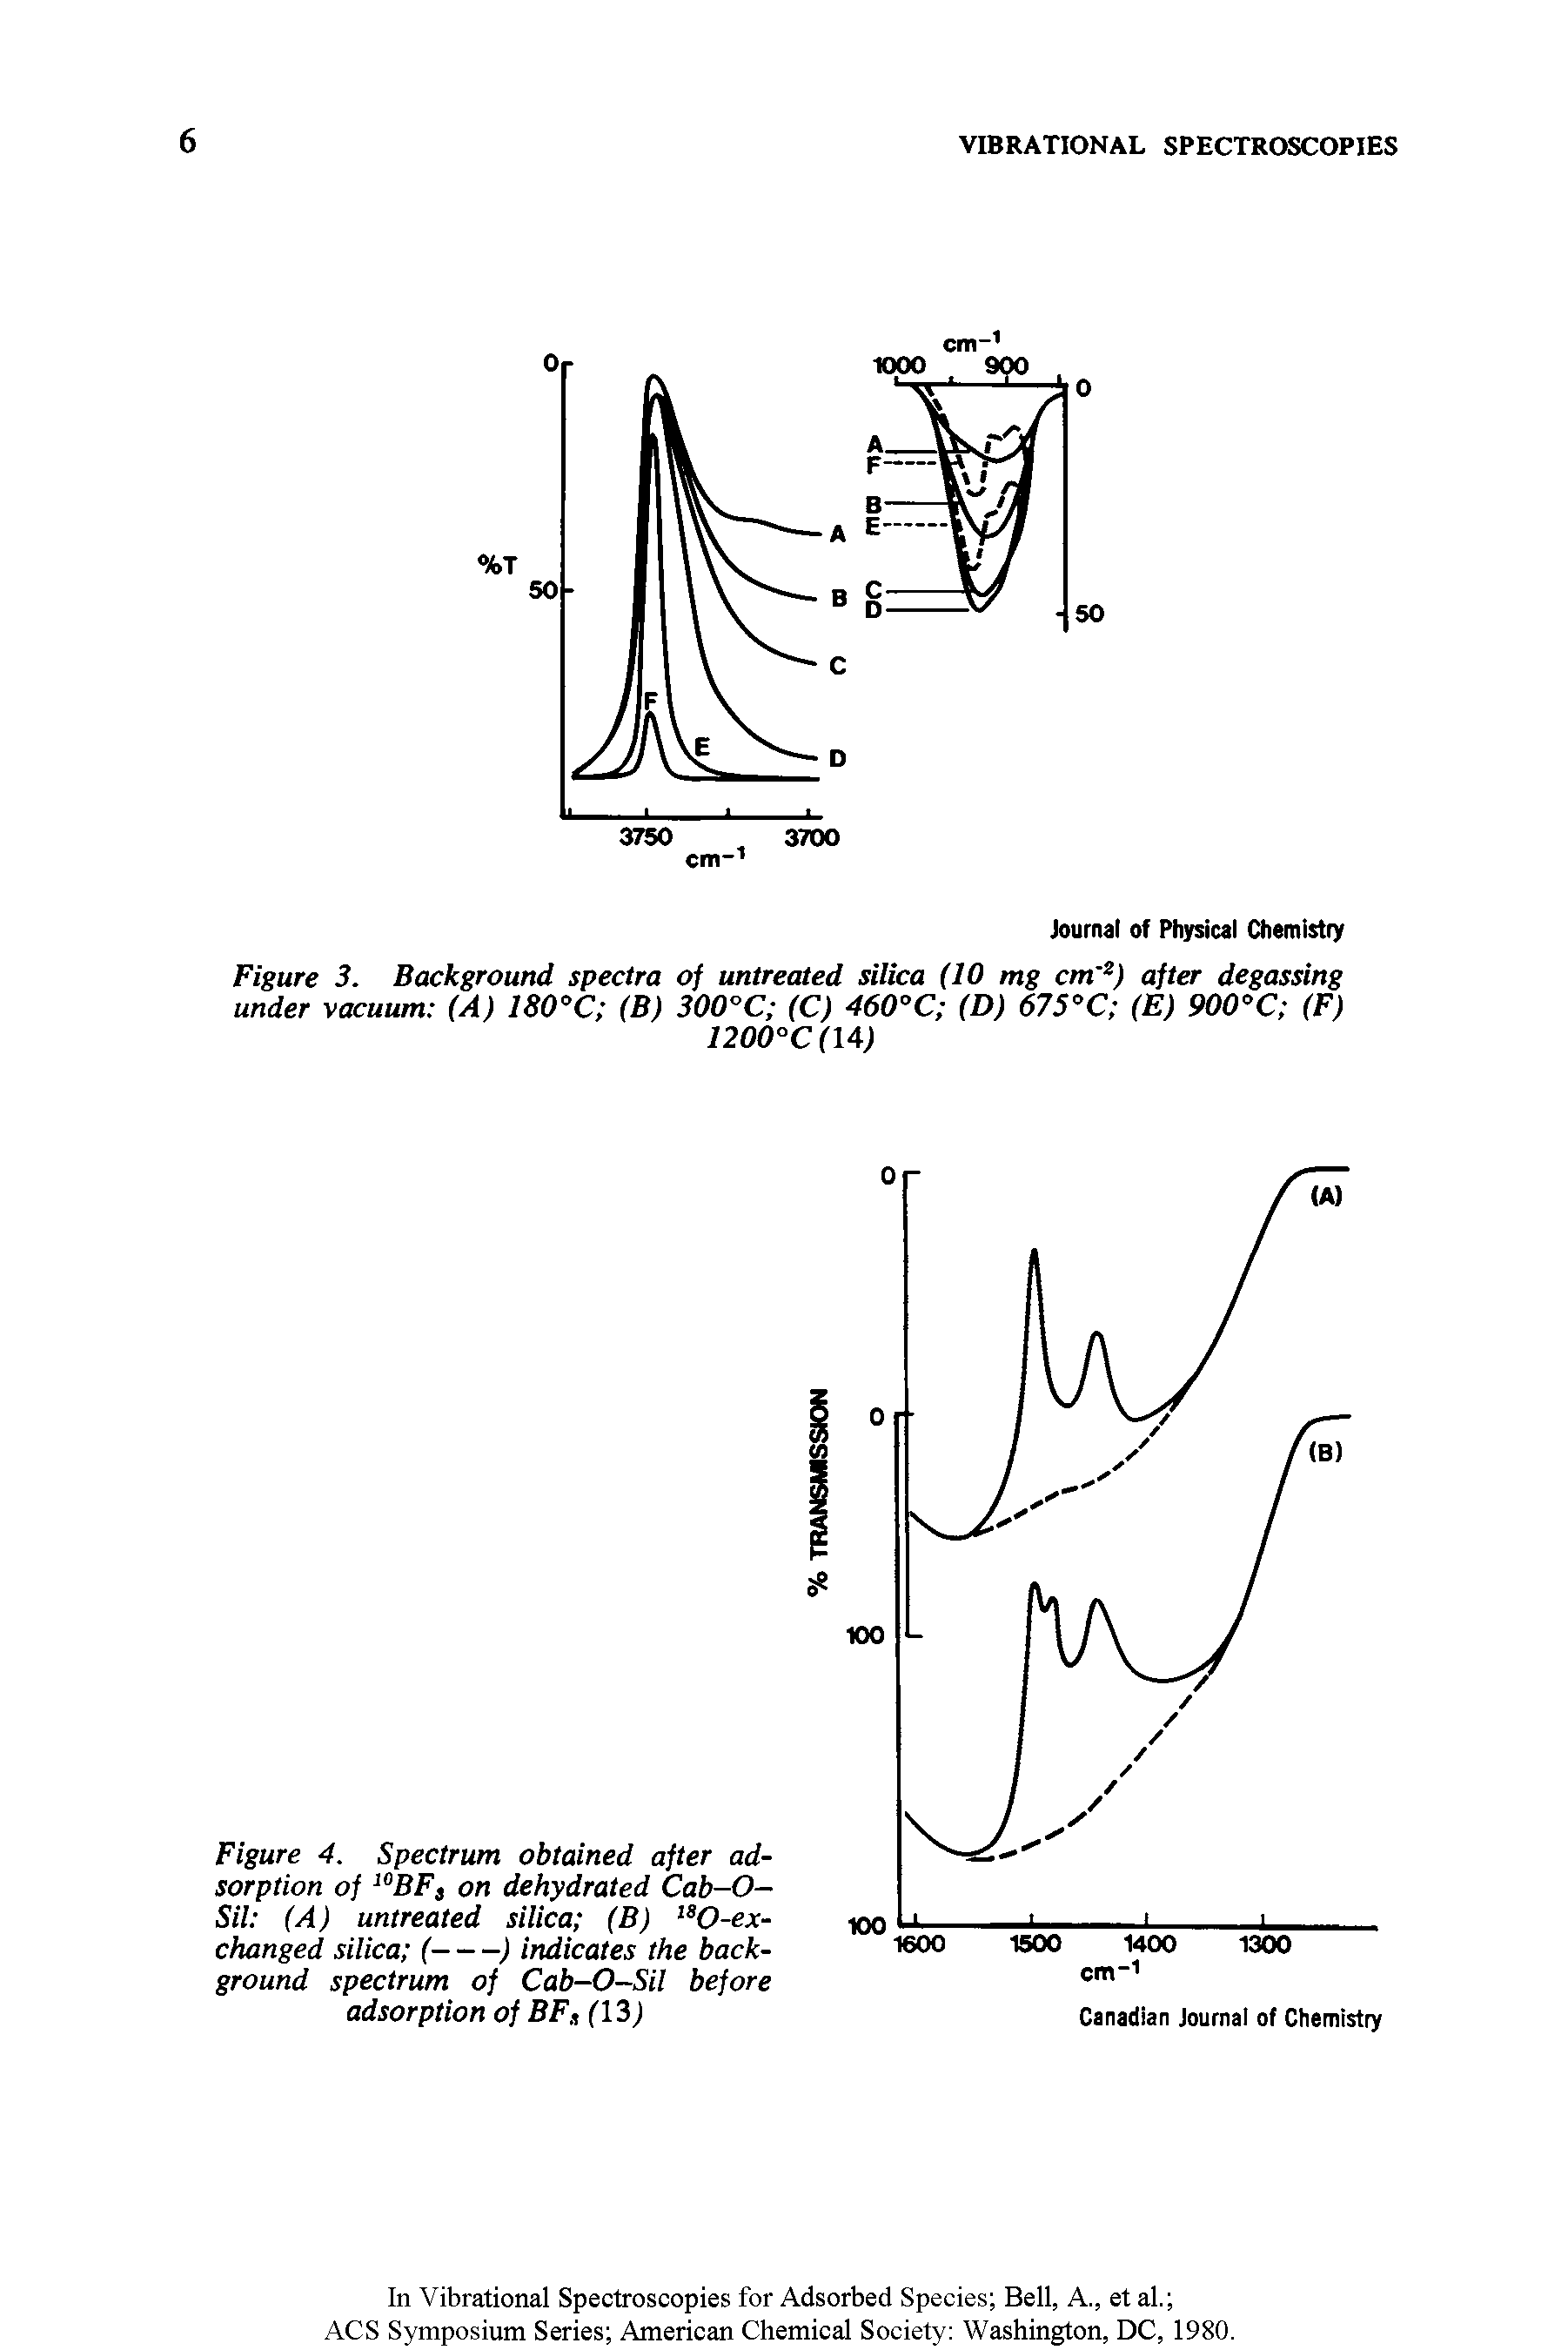 Figure 4. Spectrum obtained after adsorption of 10BFa on dehydrated Cab-O-Sil (A) untreated silica (B) 18O-exchanged silica (---) indicates the back-...